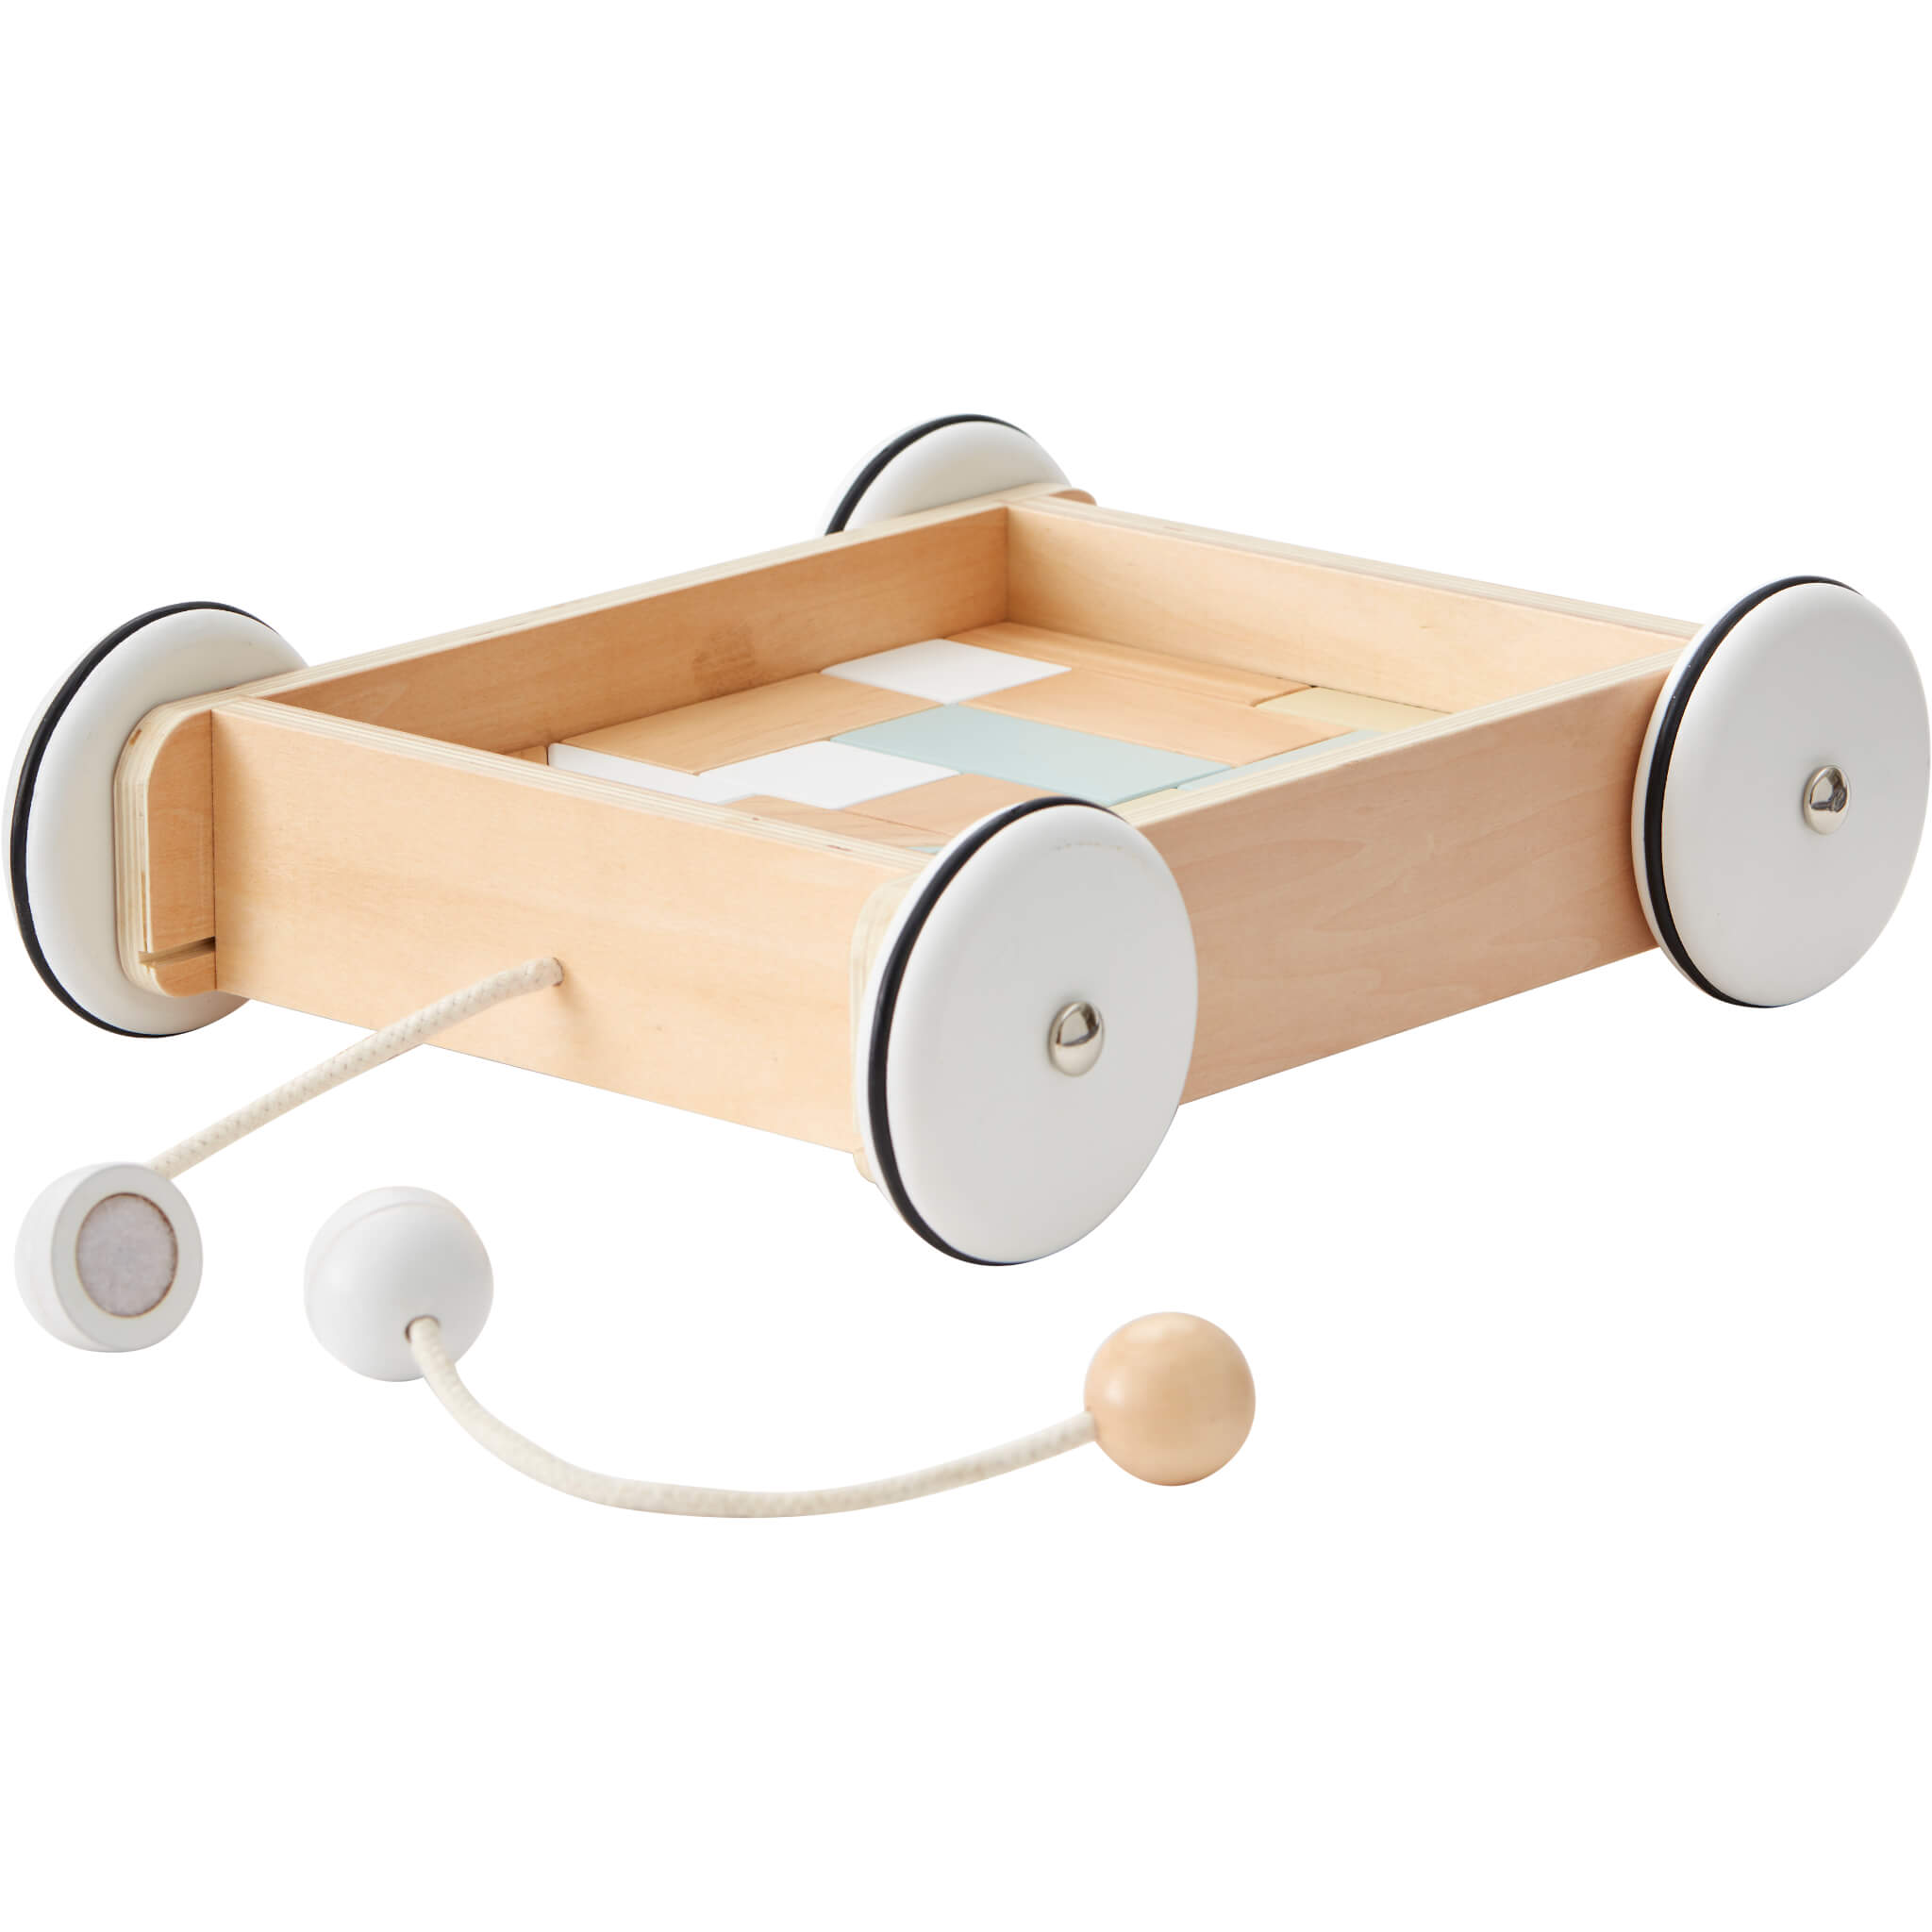 Kids Concept Pull Along Wagon With Blocks